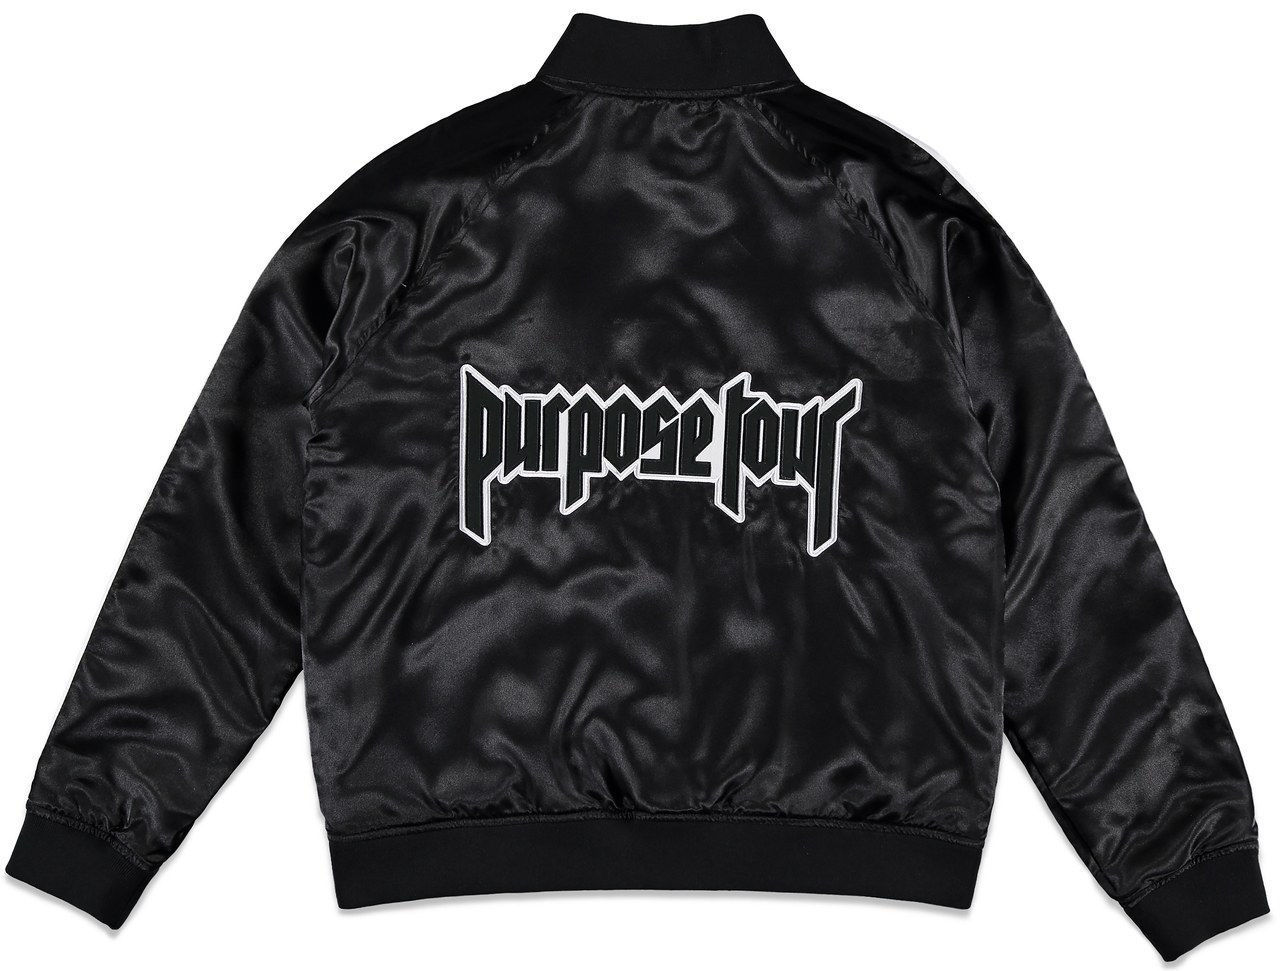 Bomber jacket, [$35](http://www.forever21.com/Product/Product.aspx?BR=f21&Category=promo-purpose-tour&ProductID=2000231268&VariantID=011)